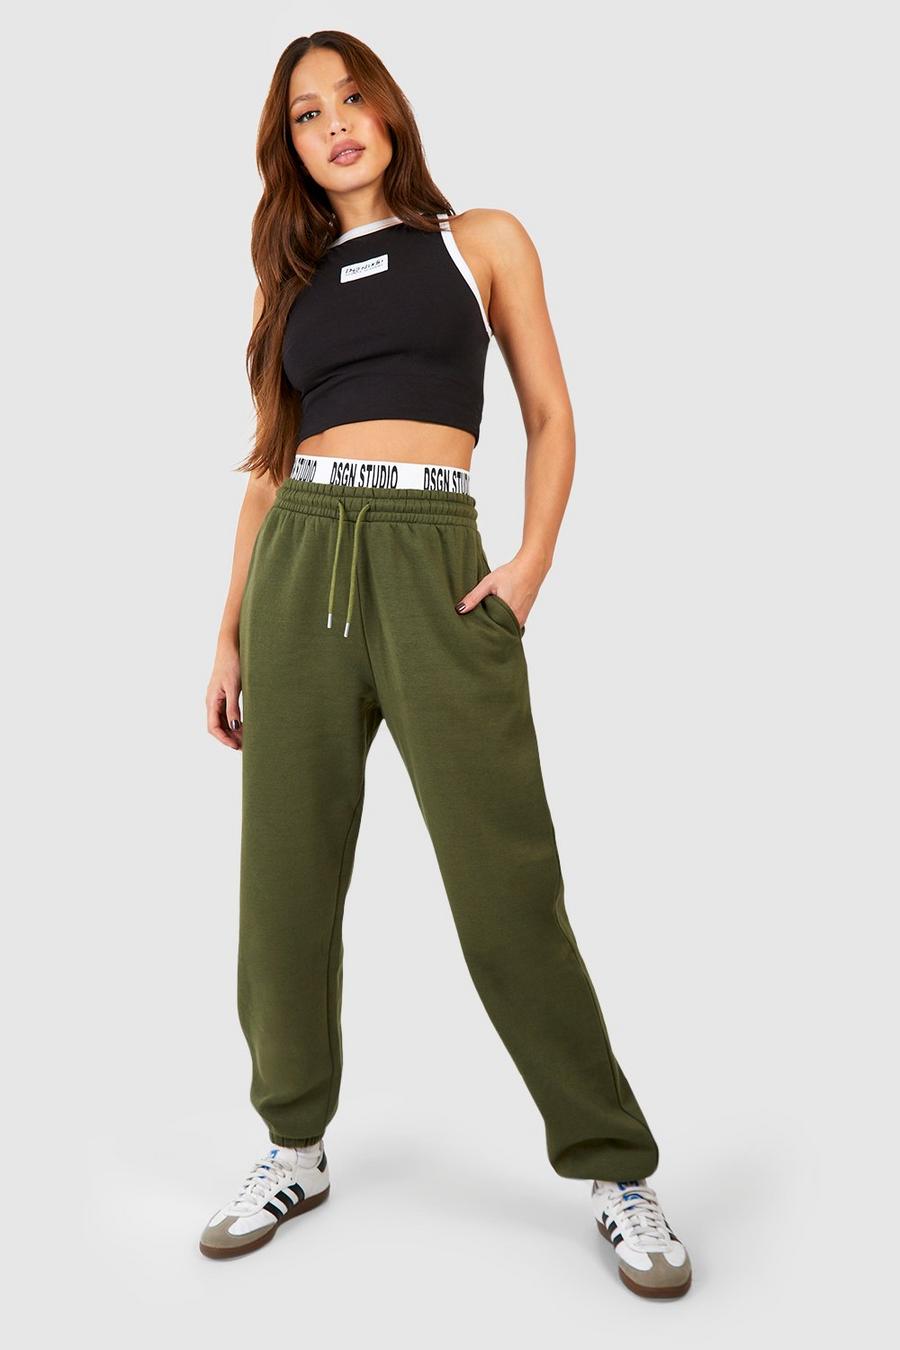 Dyegold Sweatpants For Tall Women Teen Girls Cargo Sweatpants For Women  Womens Sweatpants Work Office Sport Long Sleeve ​Activewear ​Casual Pants  For Women ​Online Shopping 